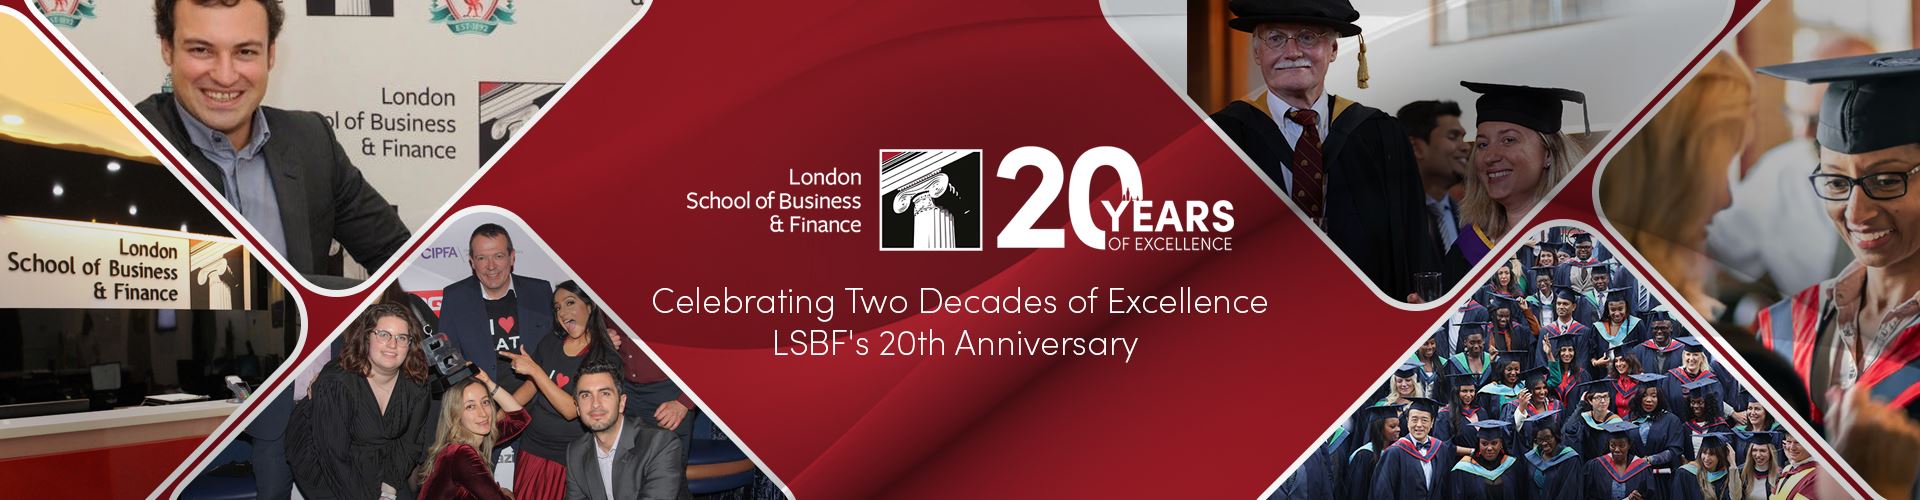 Celebrating Two Decades of Excellence: LSBF's 20th Anniversary 